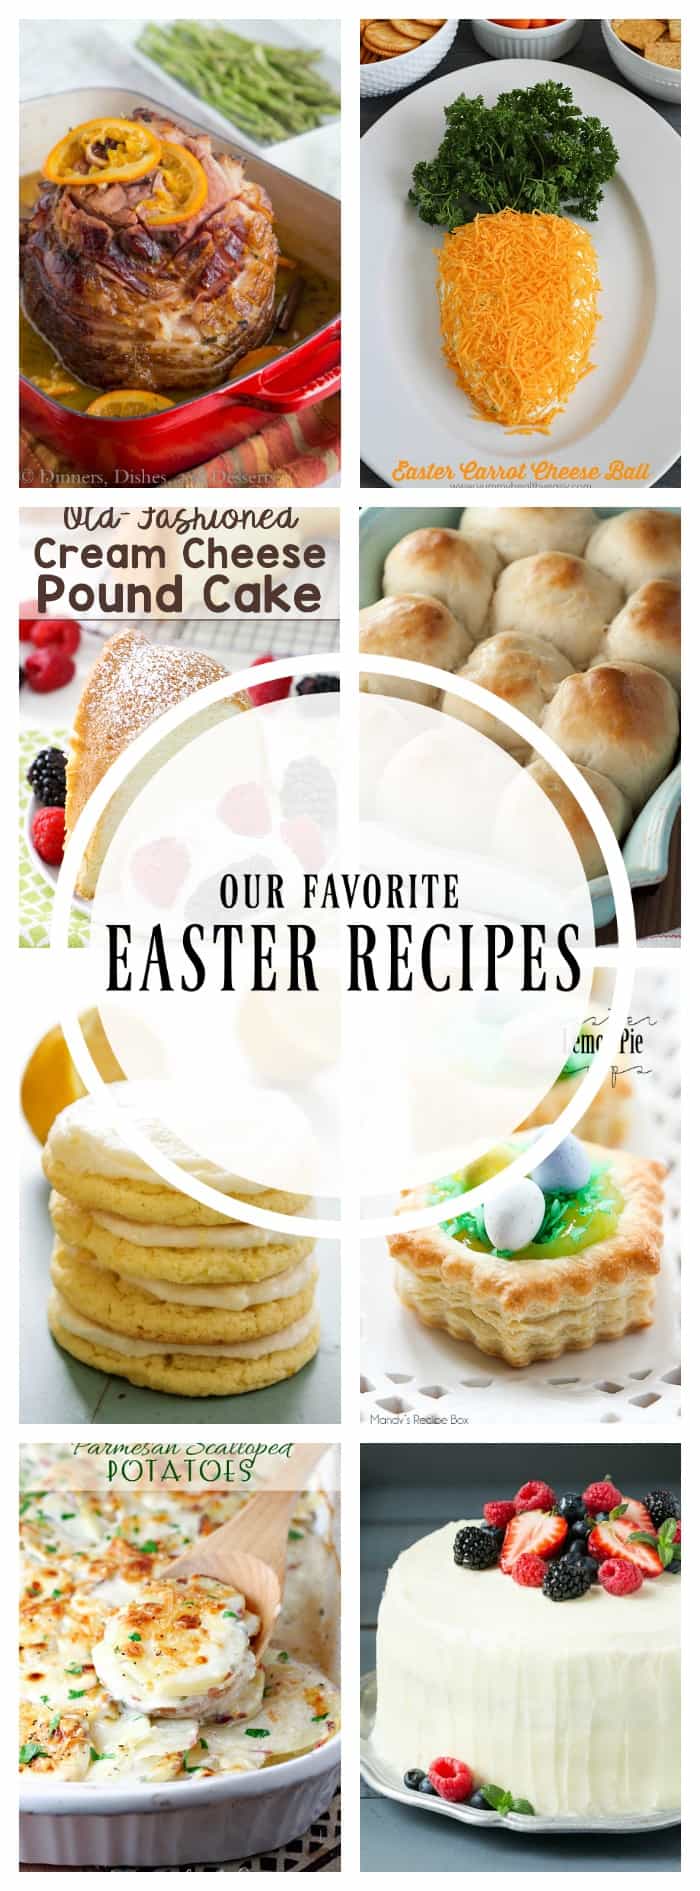 Let our favorite recipes for Easter help you as you plan your holiday meal! Entertaining will be so simple and tasty this year!